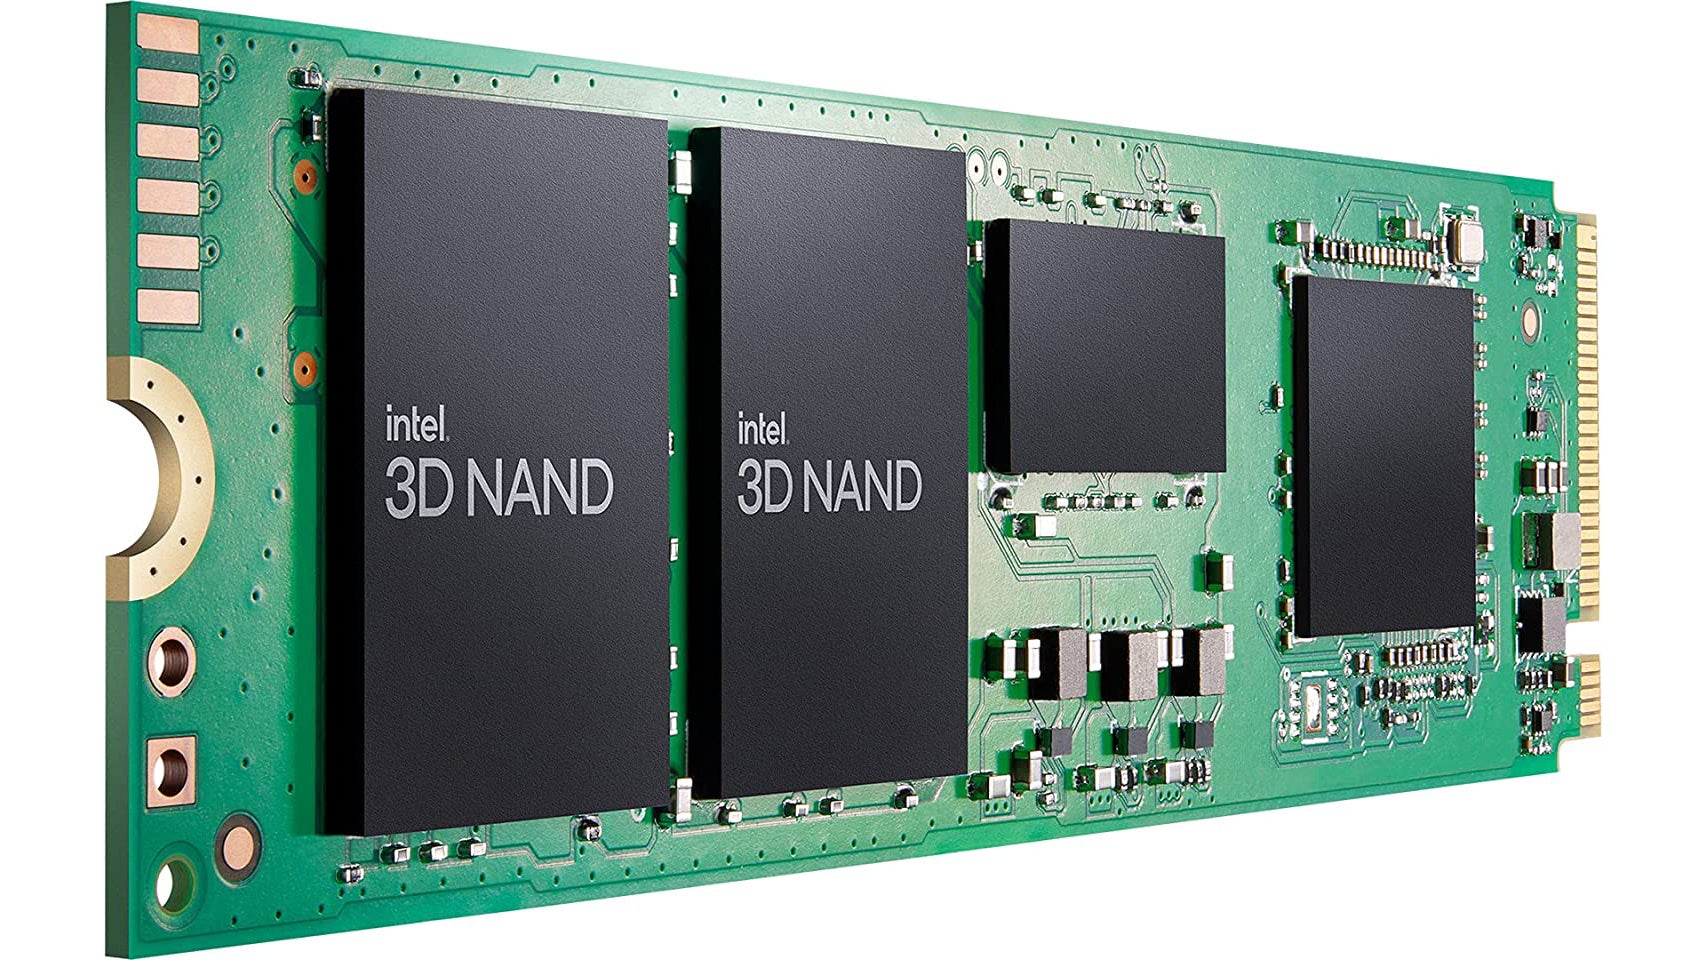 an intel ssd 670p series is pictured, with black 3D QLC NAND chips on a green circuit board in the familiar M.2 NVMe form factor.